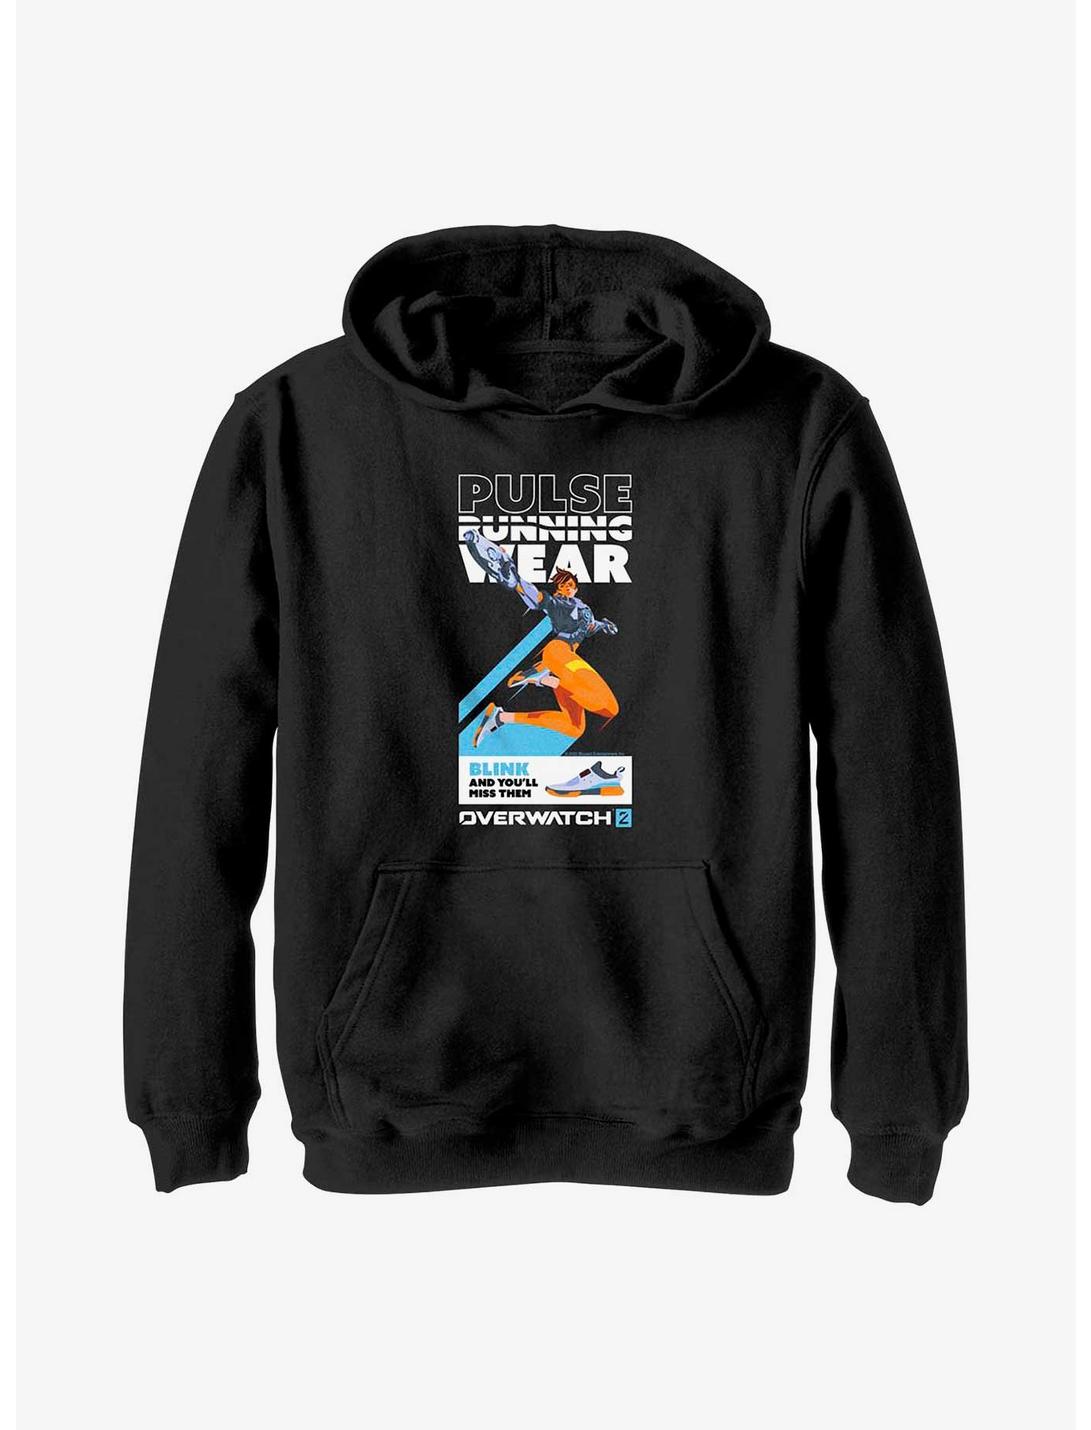 Overwatch 2 Tracer Pulse Running Wear Youth Hoodie, BLACK, hi-res